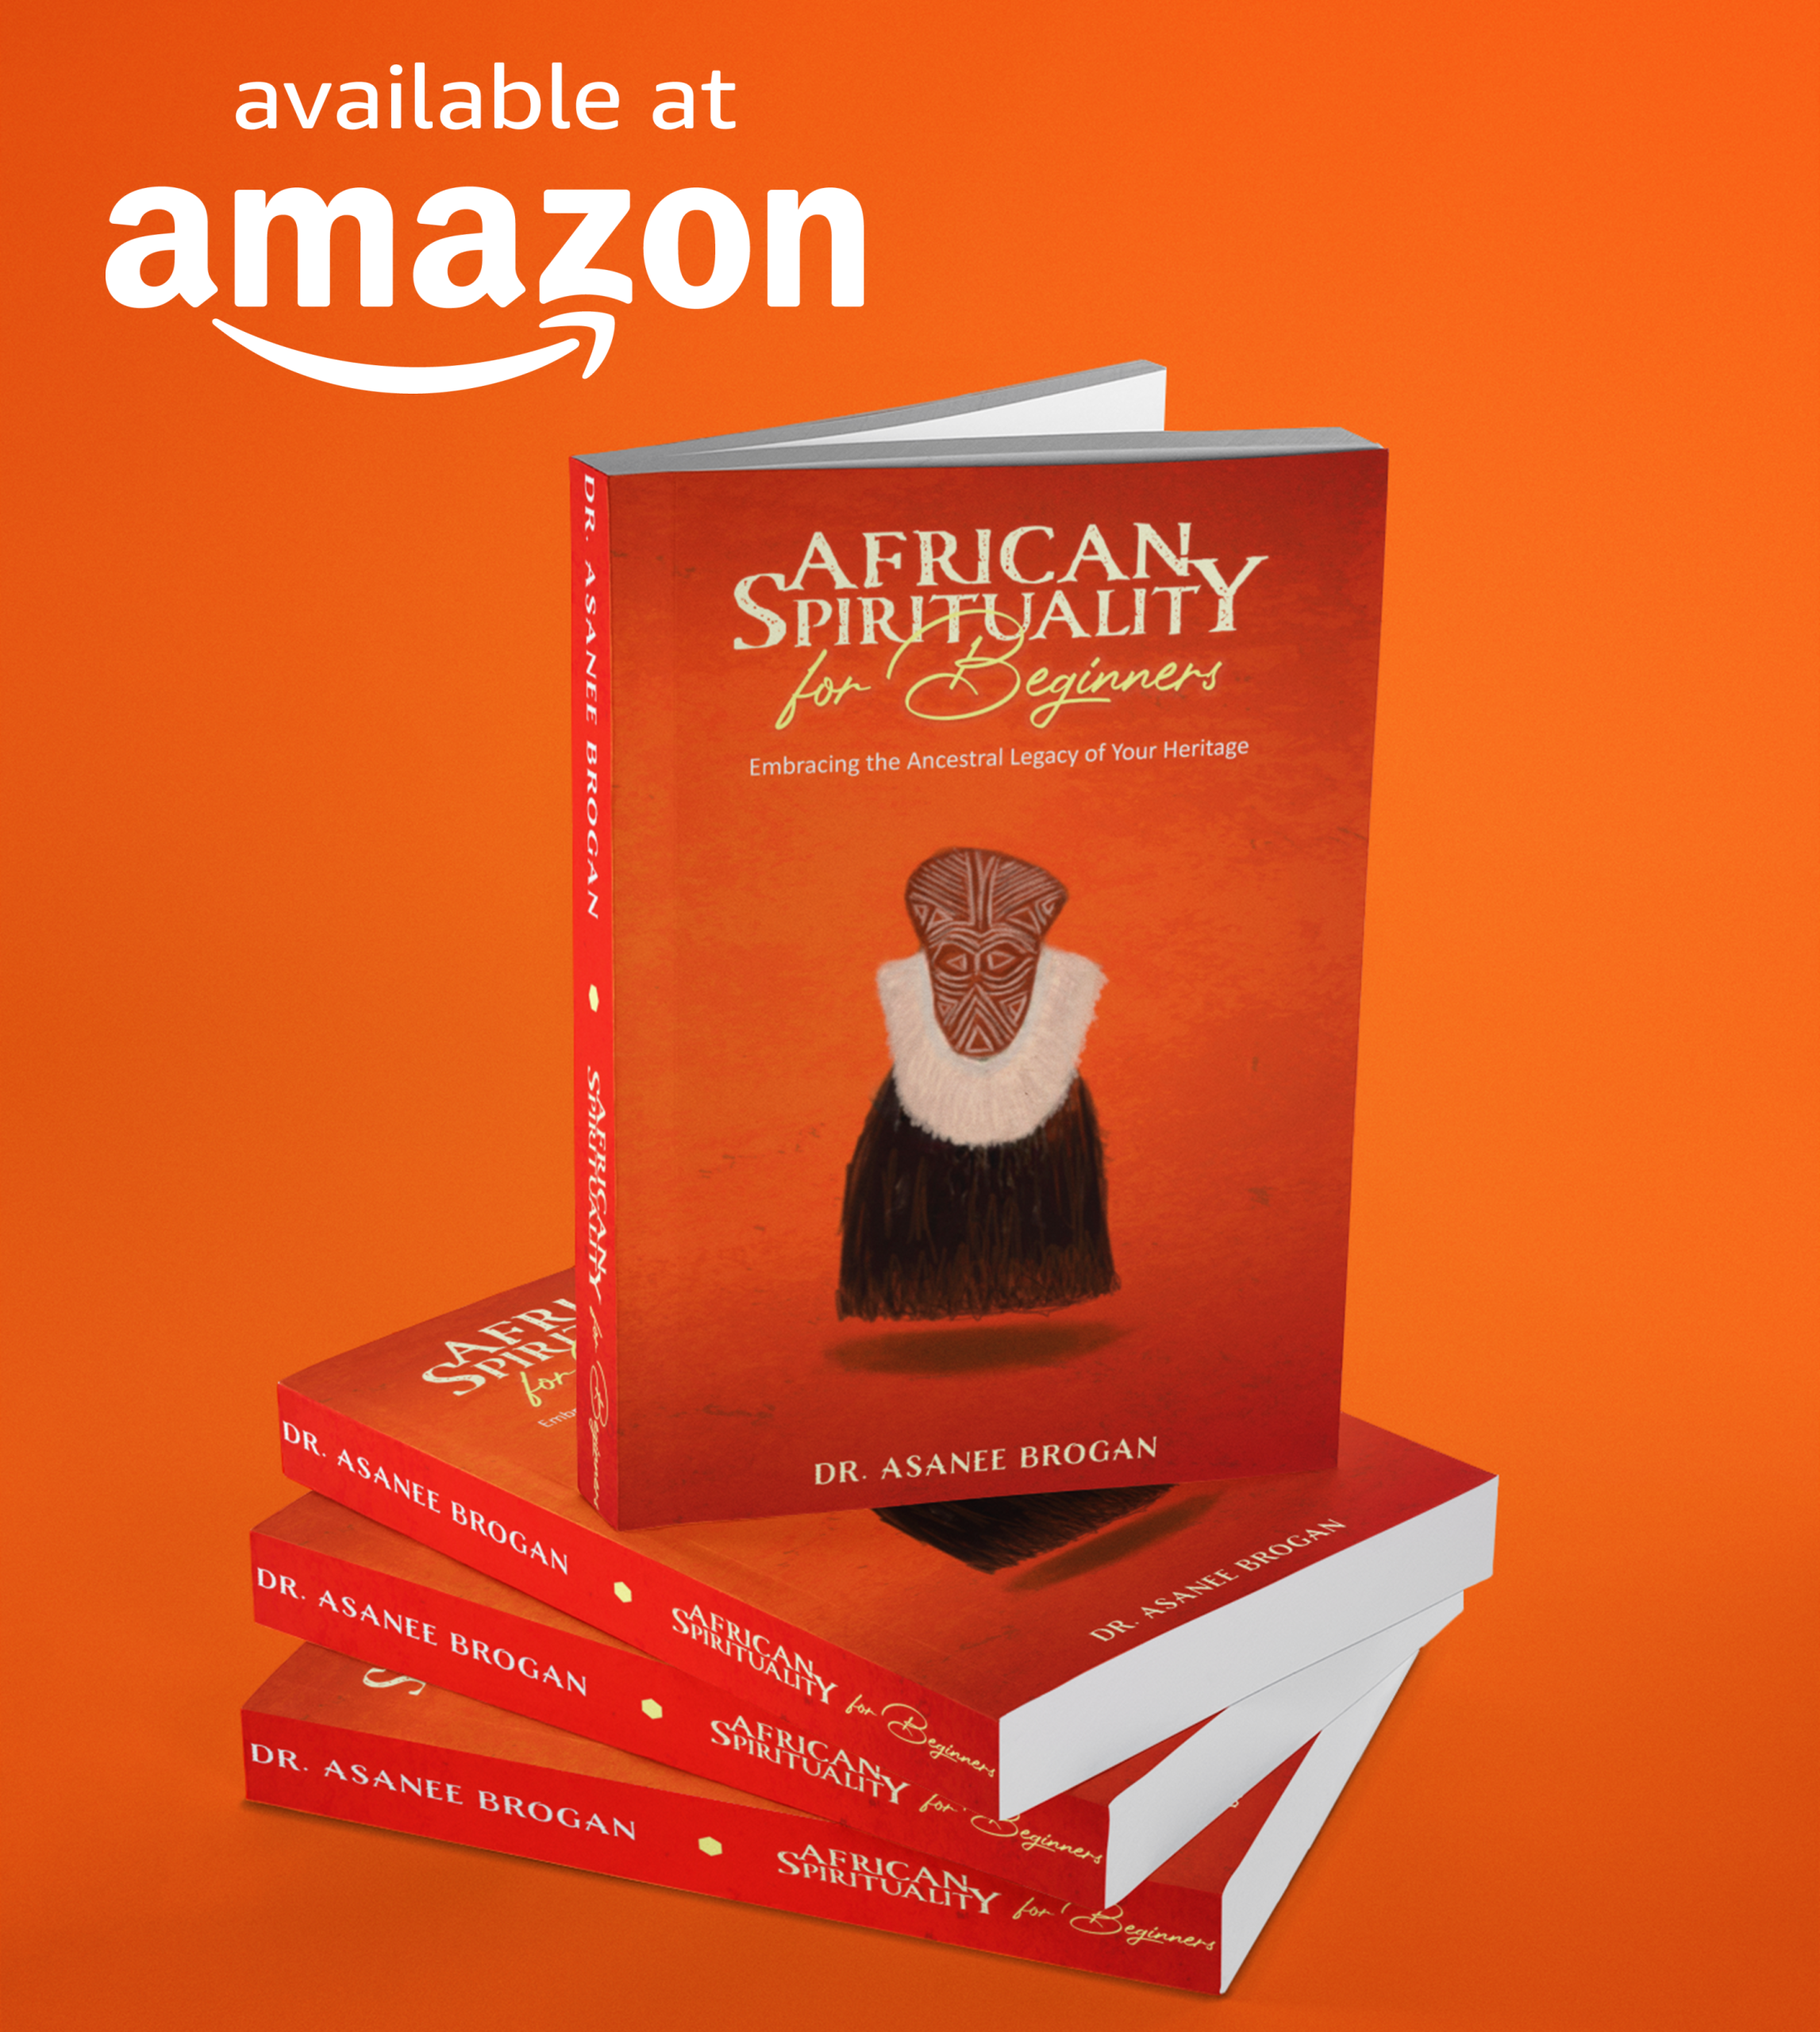 Pre-Order Now - African Spirituality for Beginners // Available at Amazon